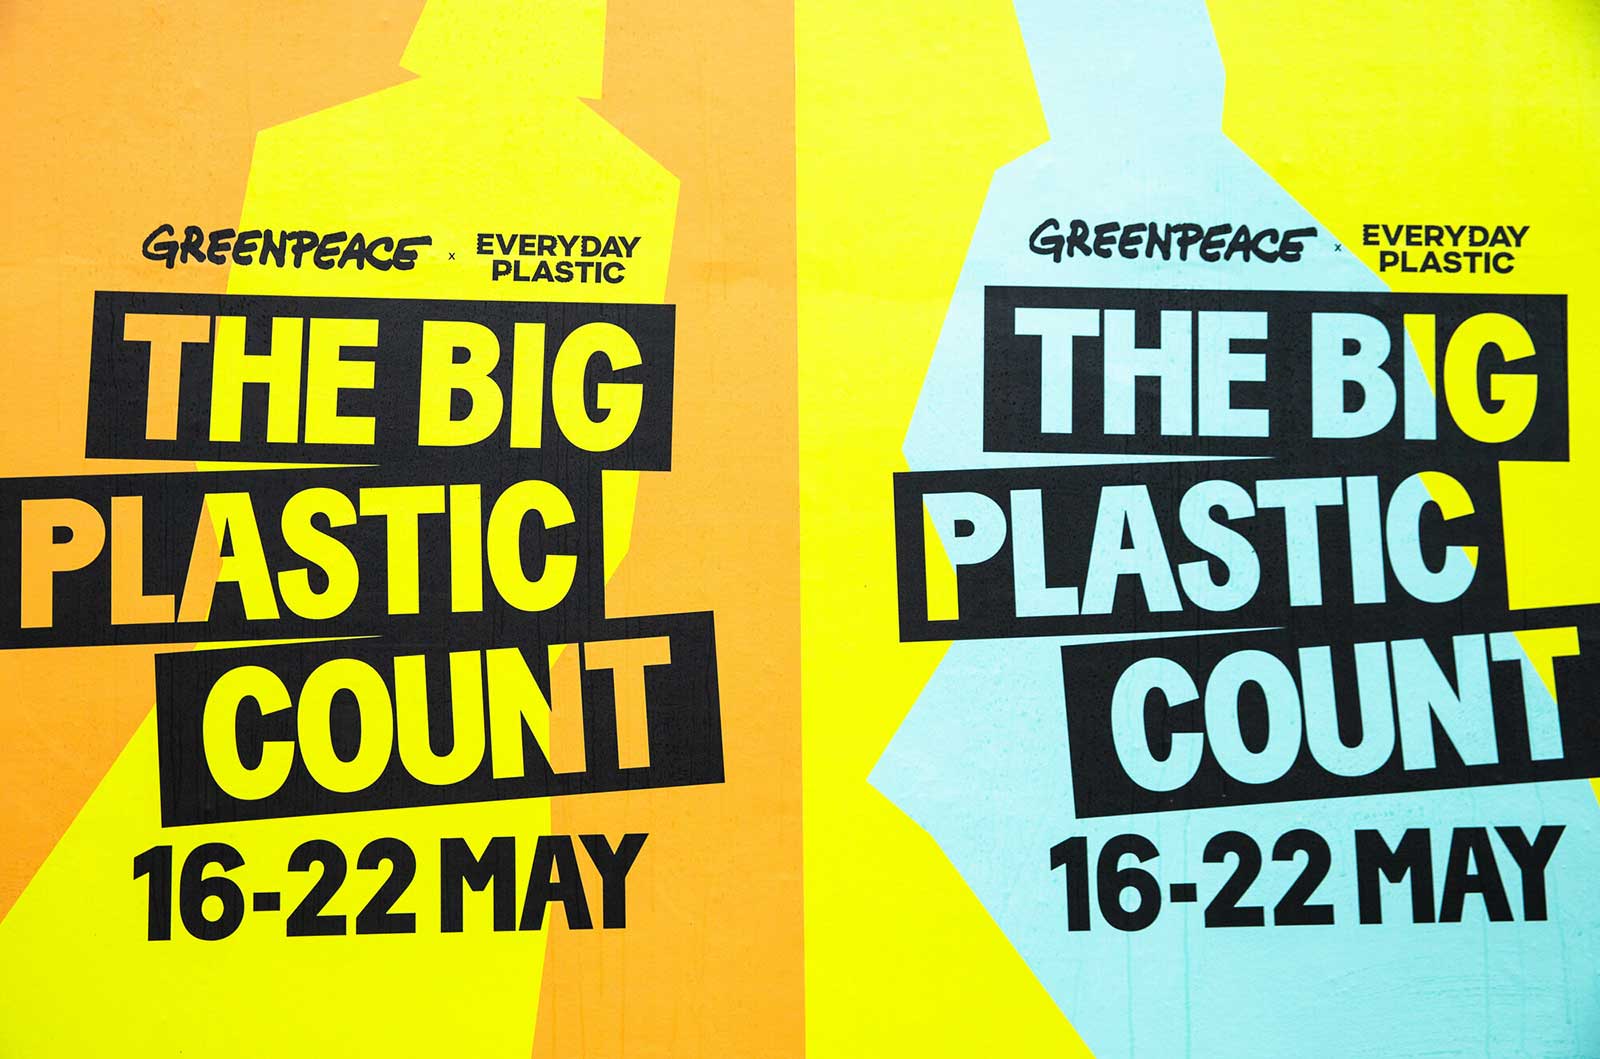 Platforming The Big Plastic Count on the streets of London for Greenpeace